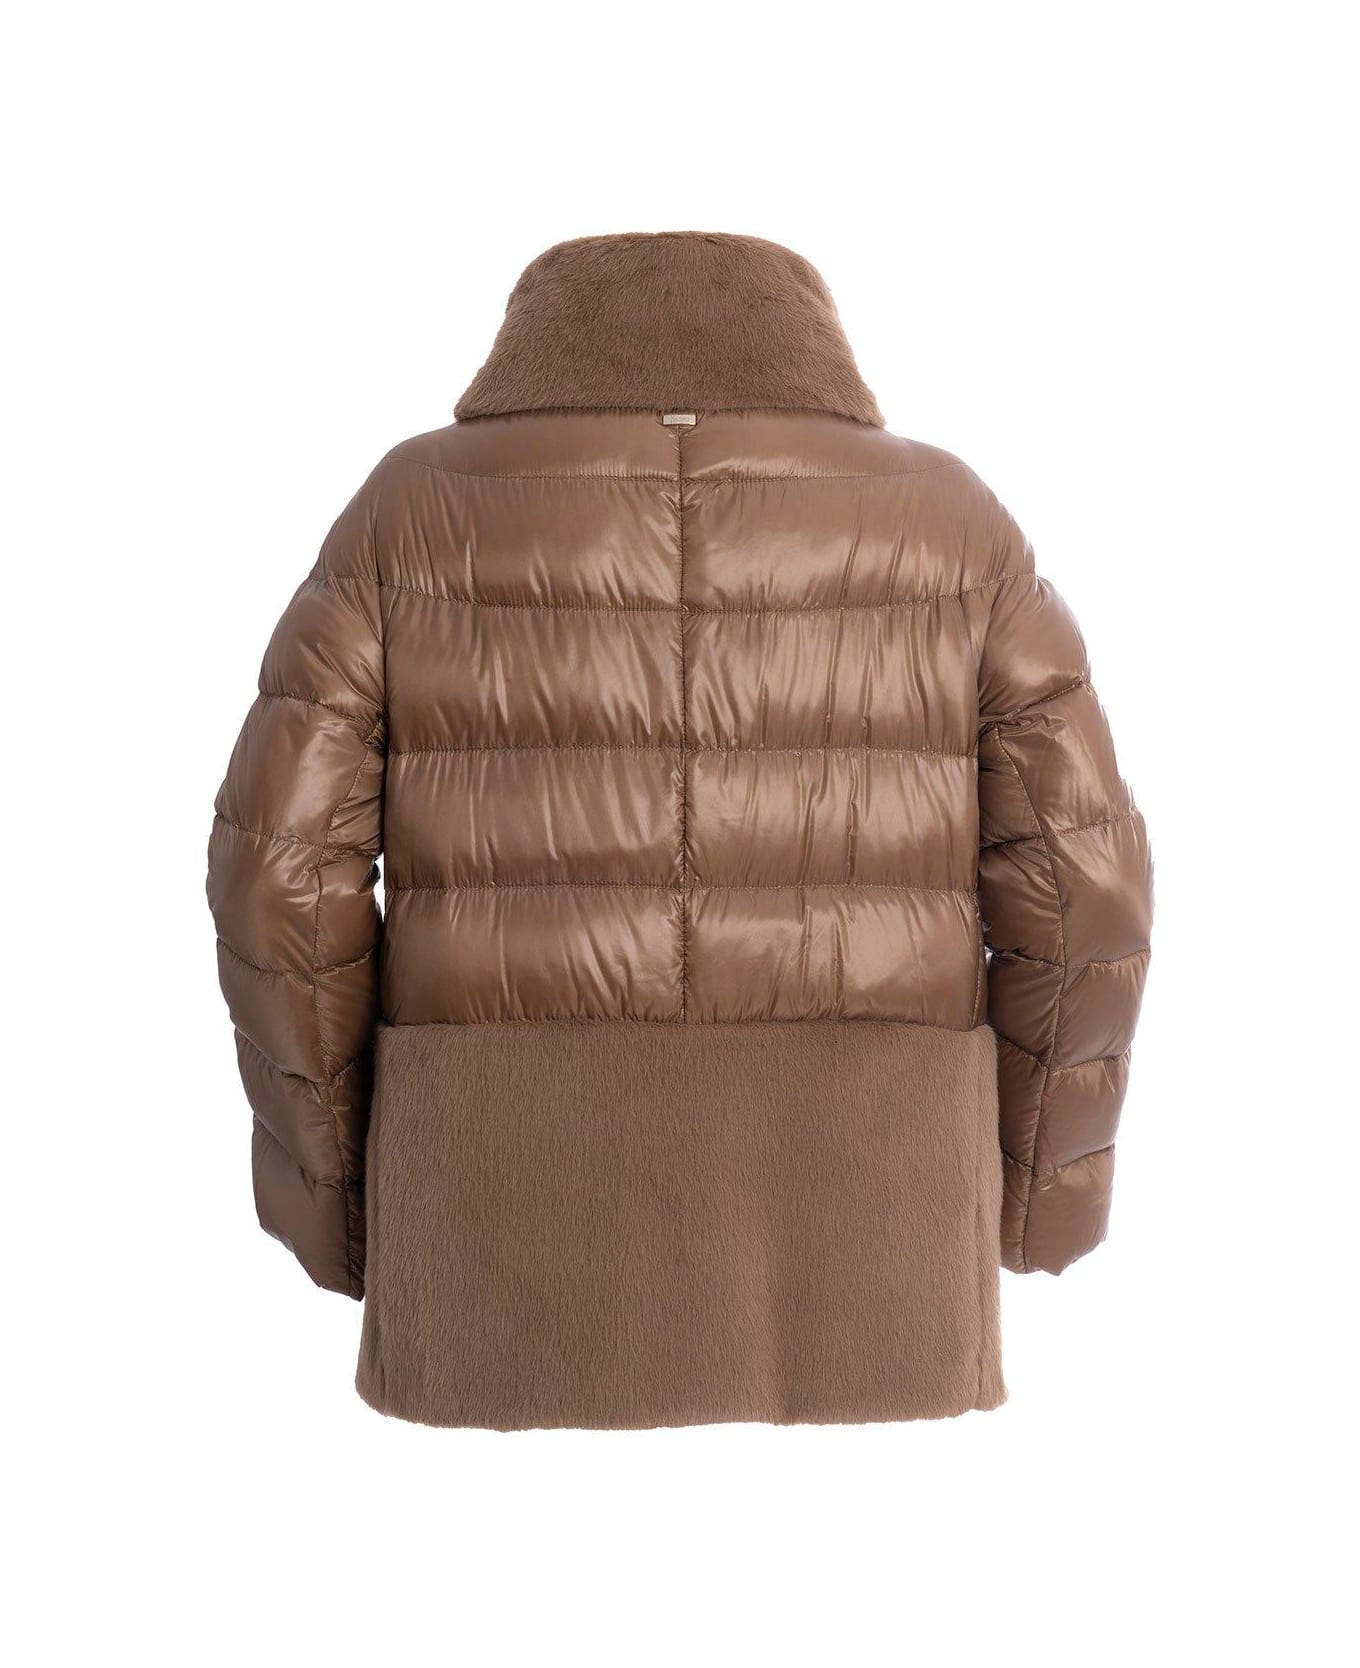 Herno Panelled Zipped Down Jacket - Cammello